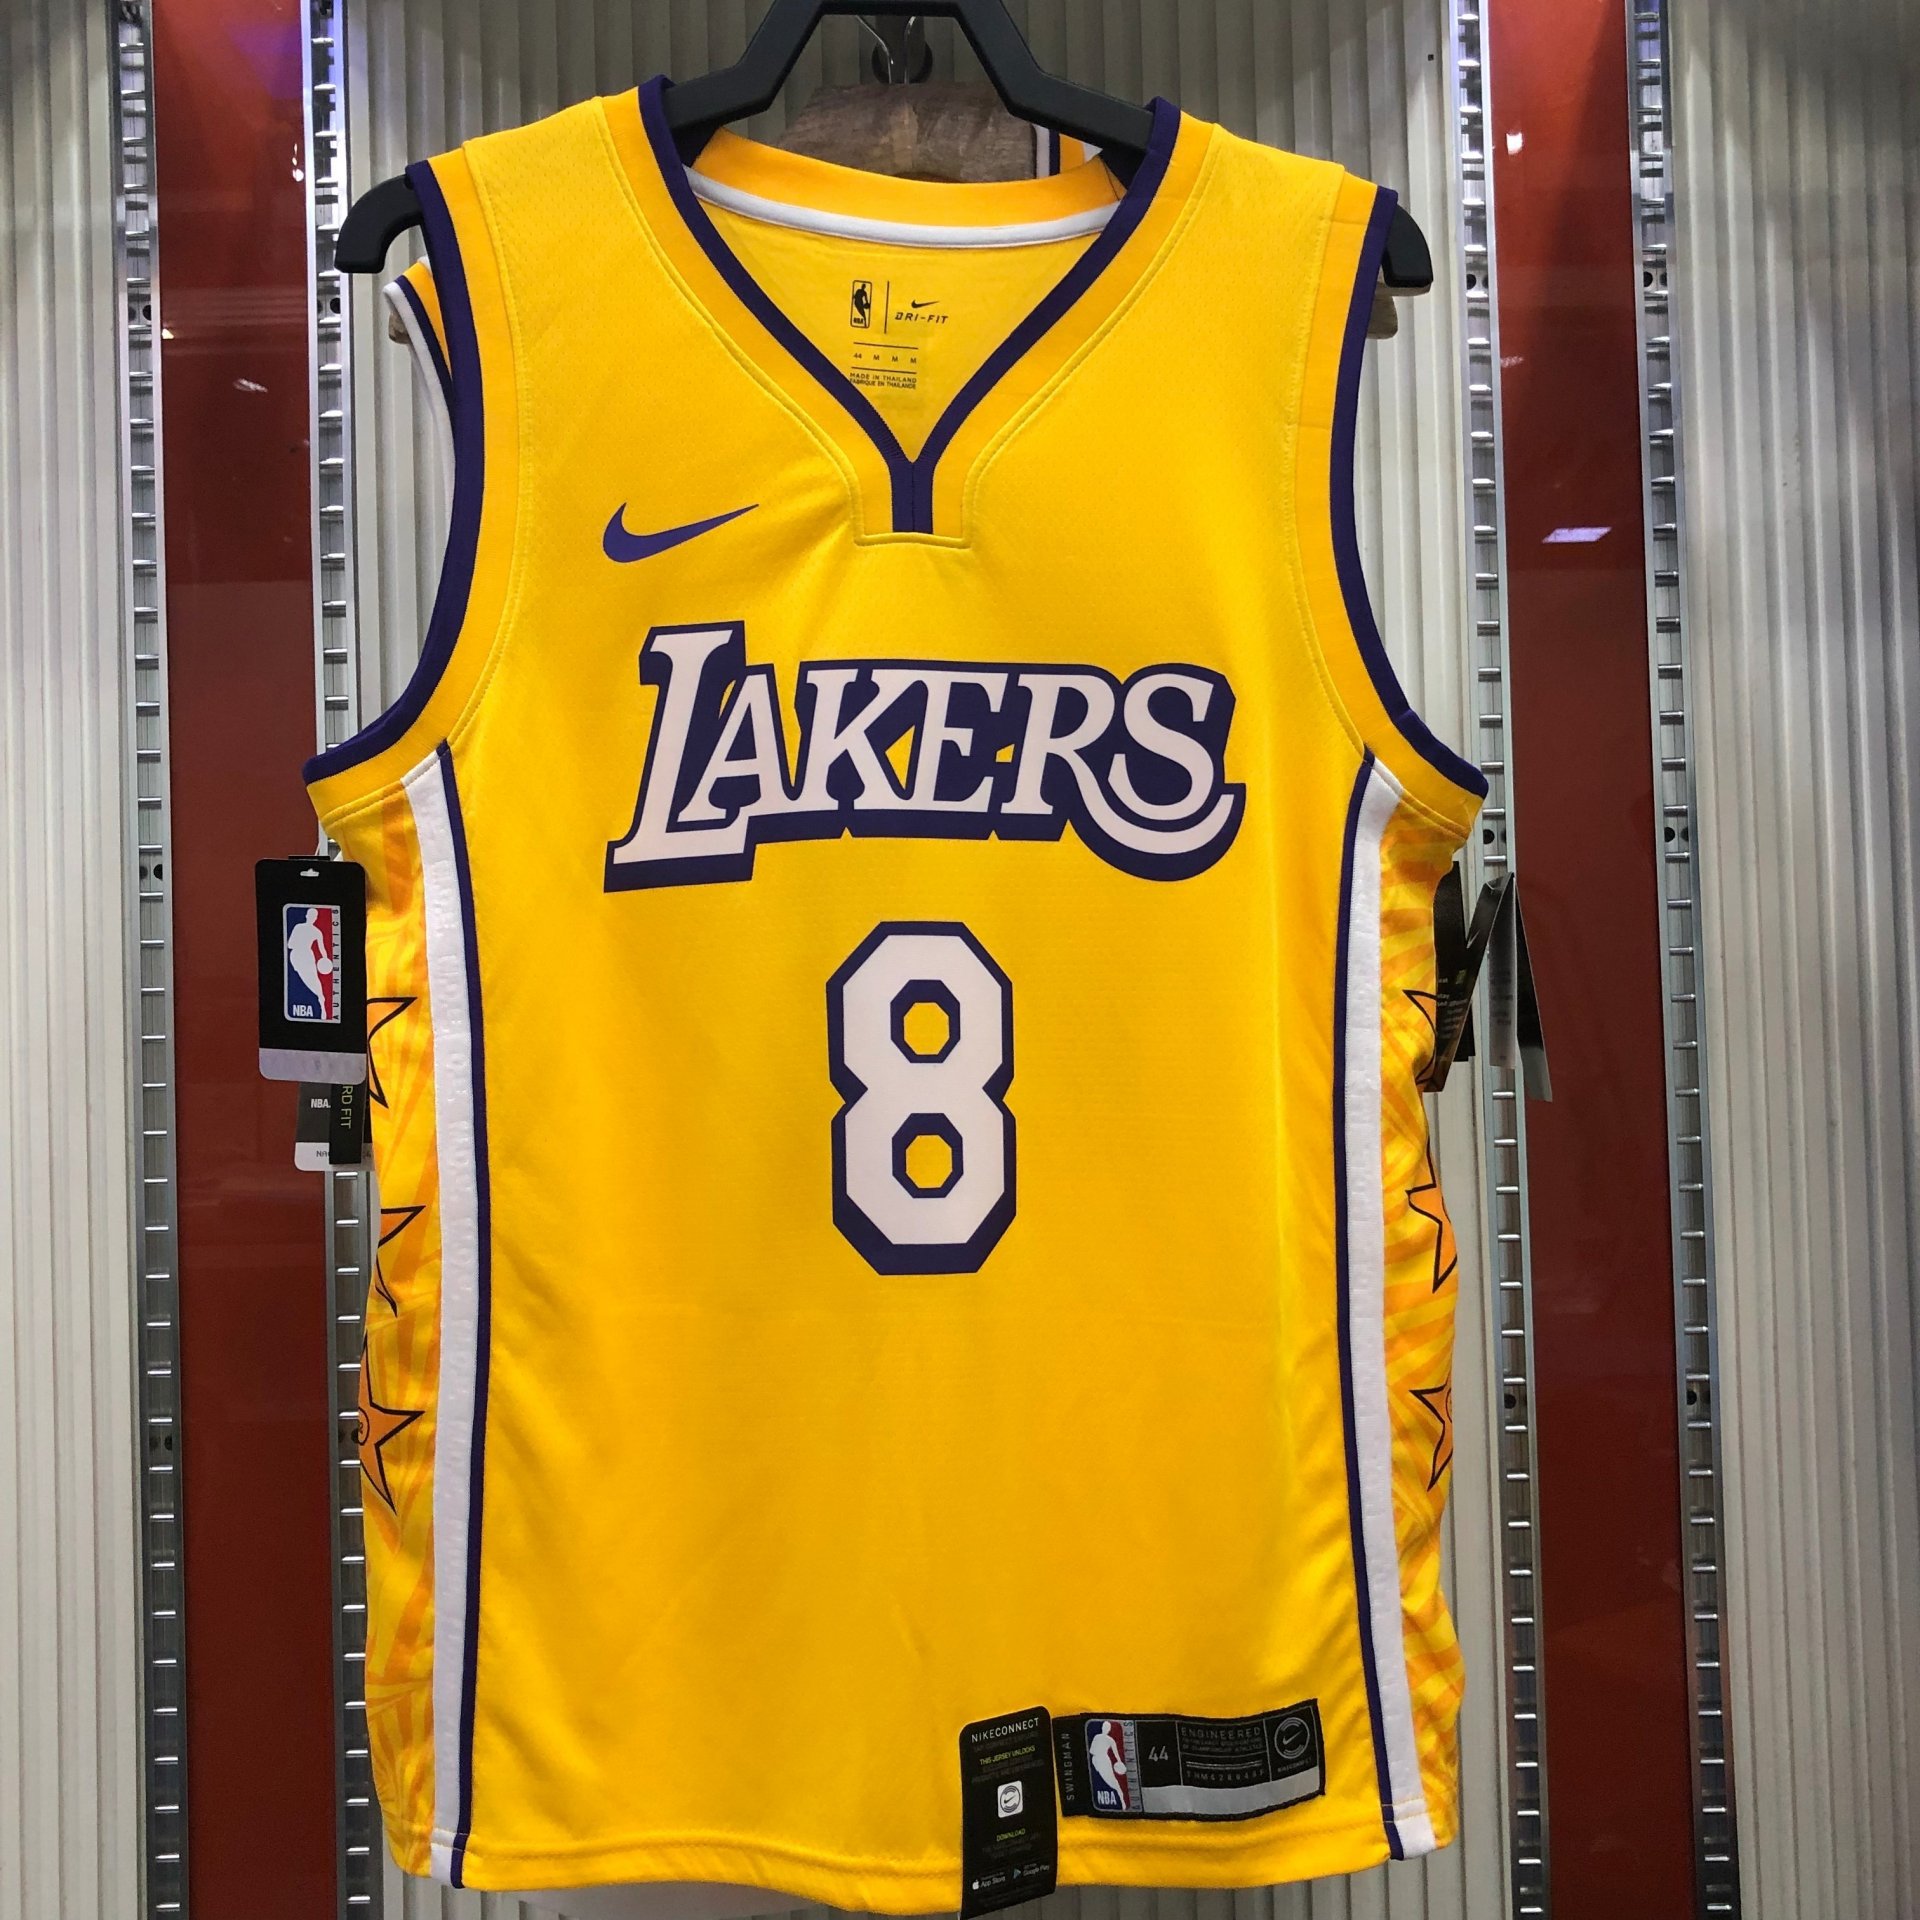 Kyle Kuzma Los Angeles Lakers jersey size 52 (fits more large). $OLD